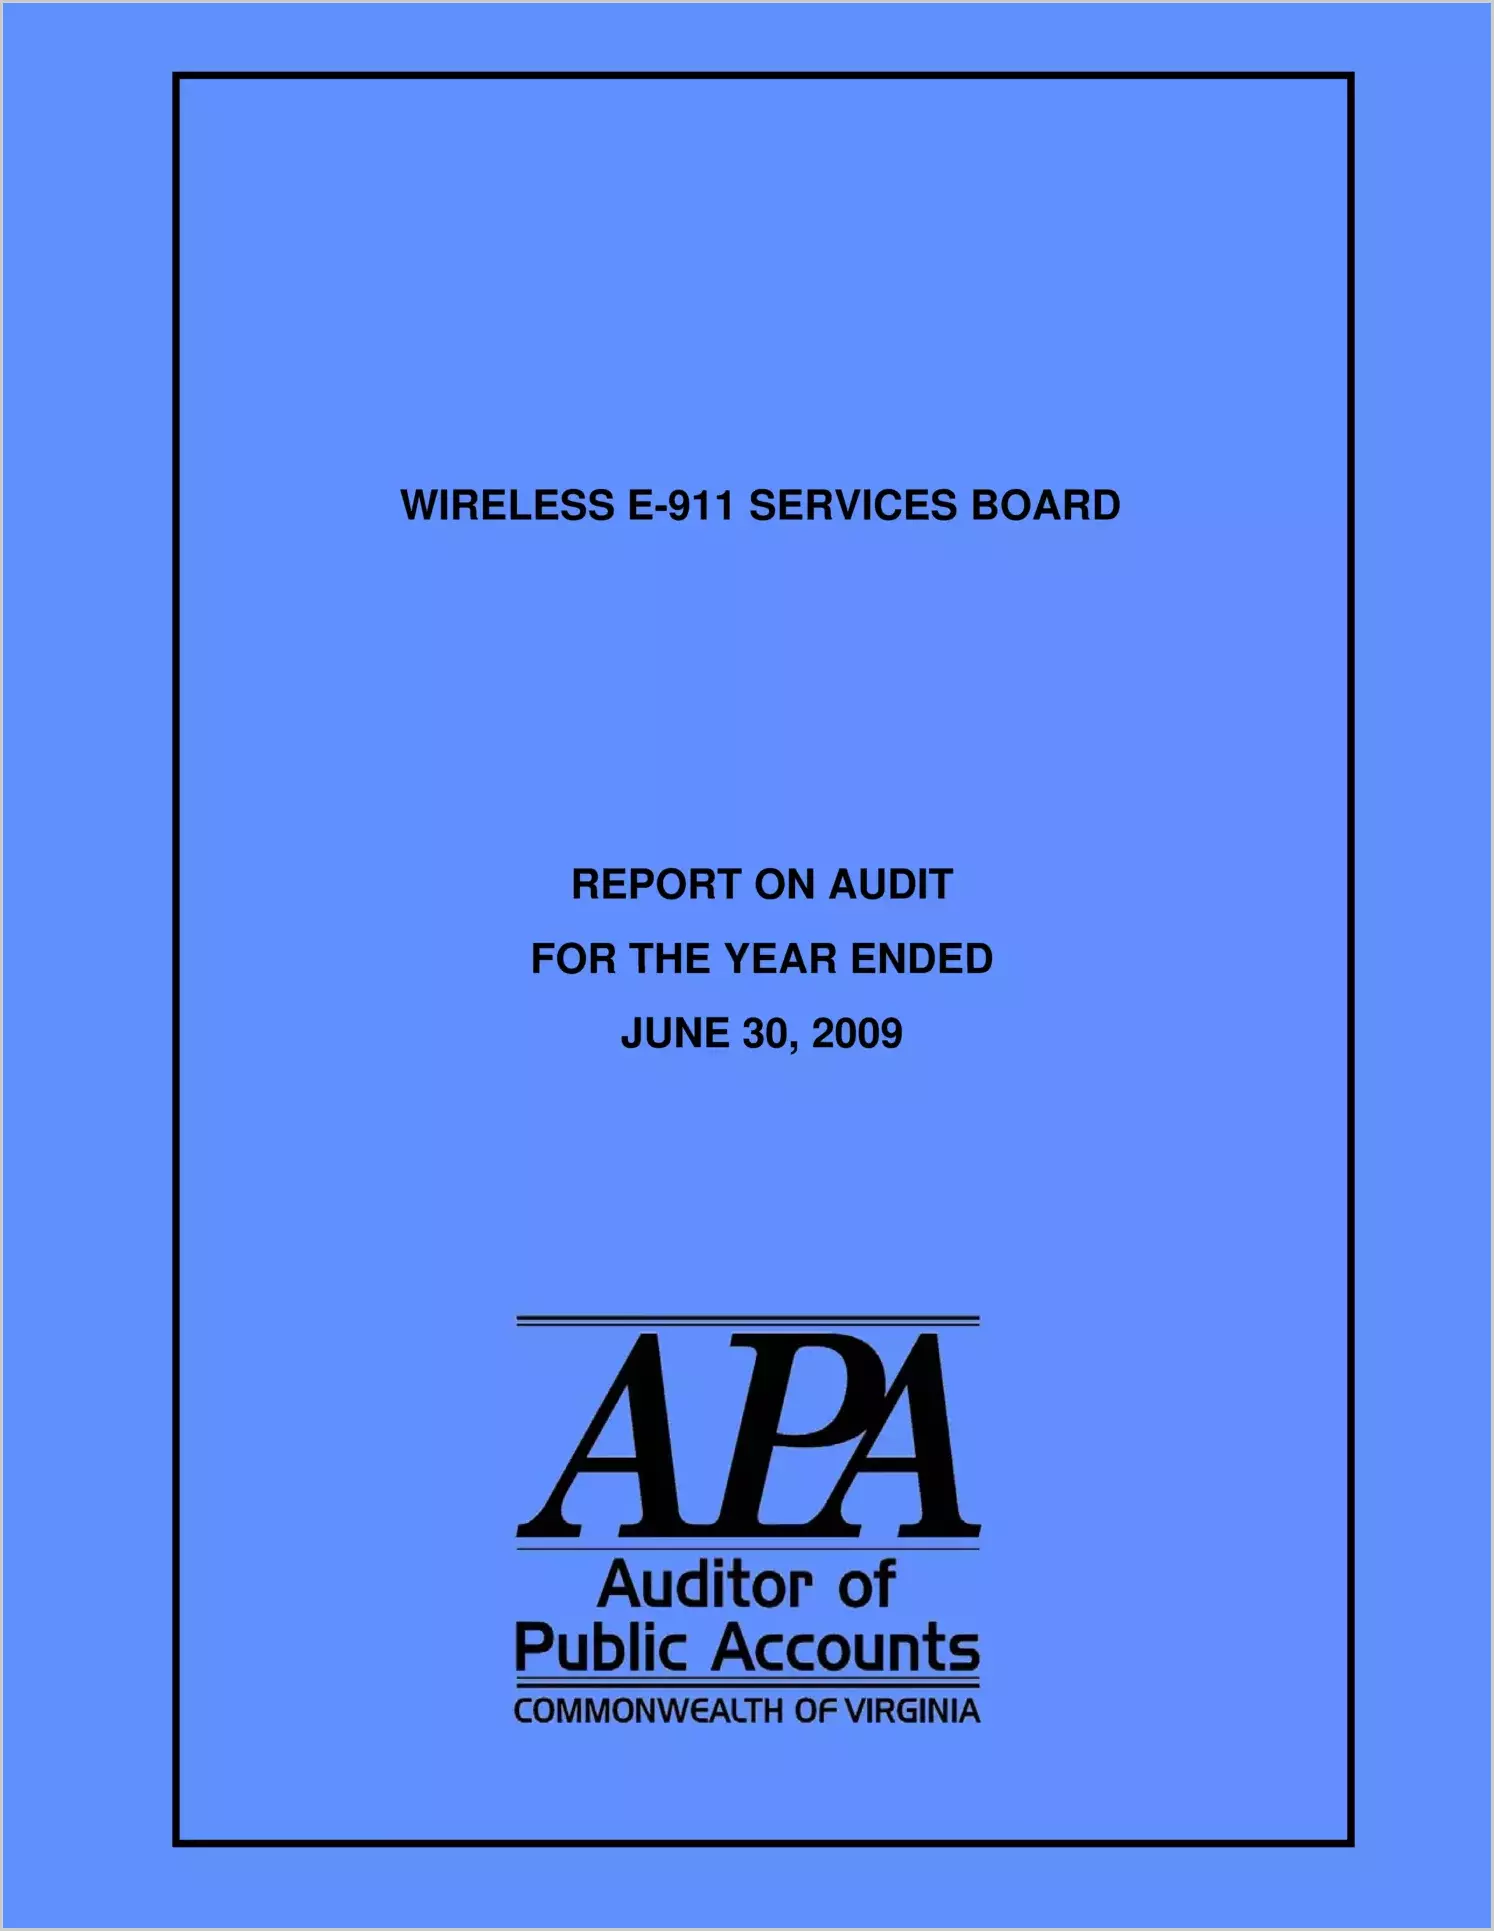 Wireless E-911 Services Board report on audit for the year ended June 30, 2009